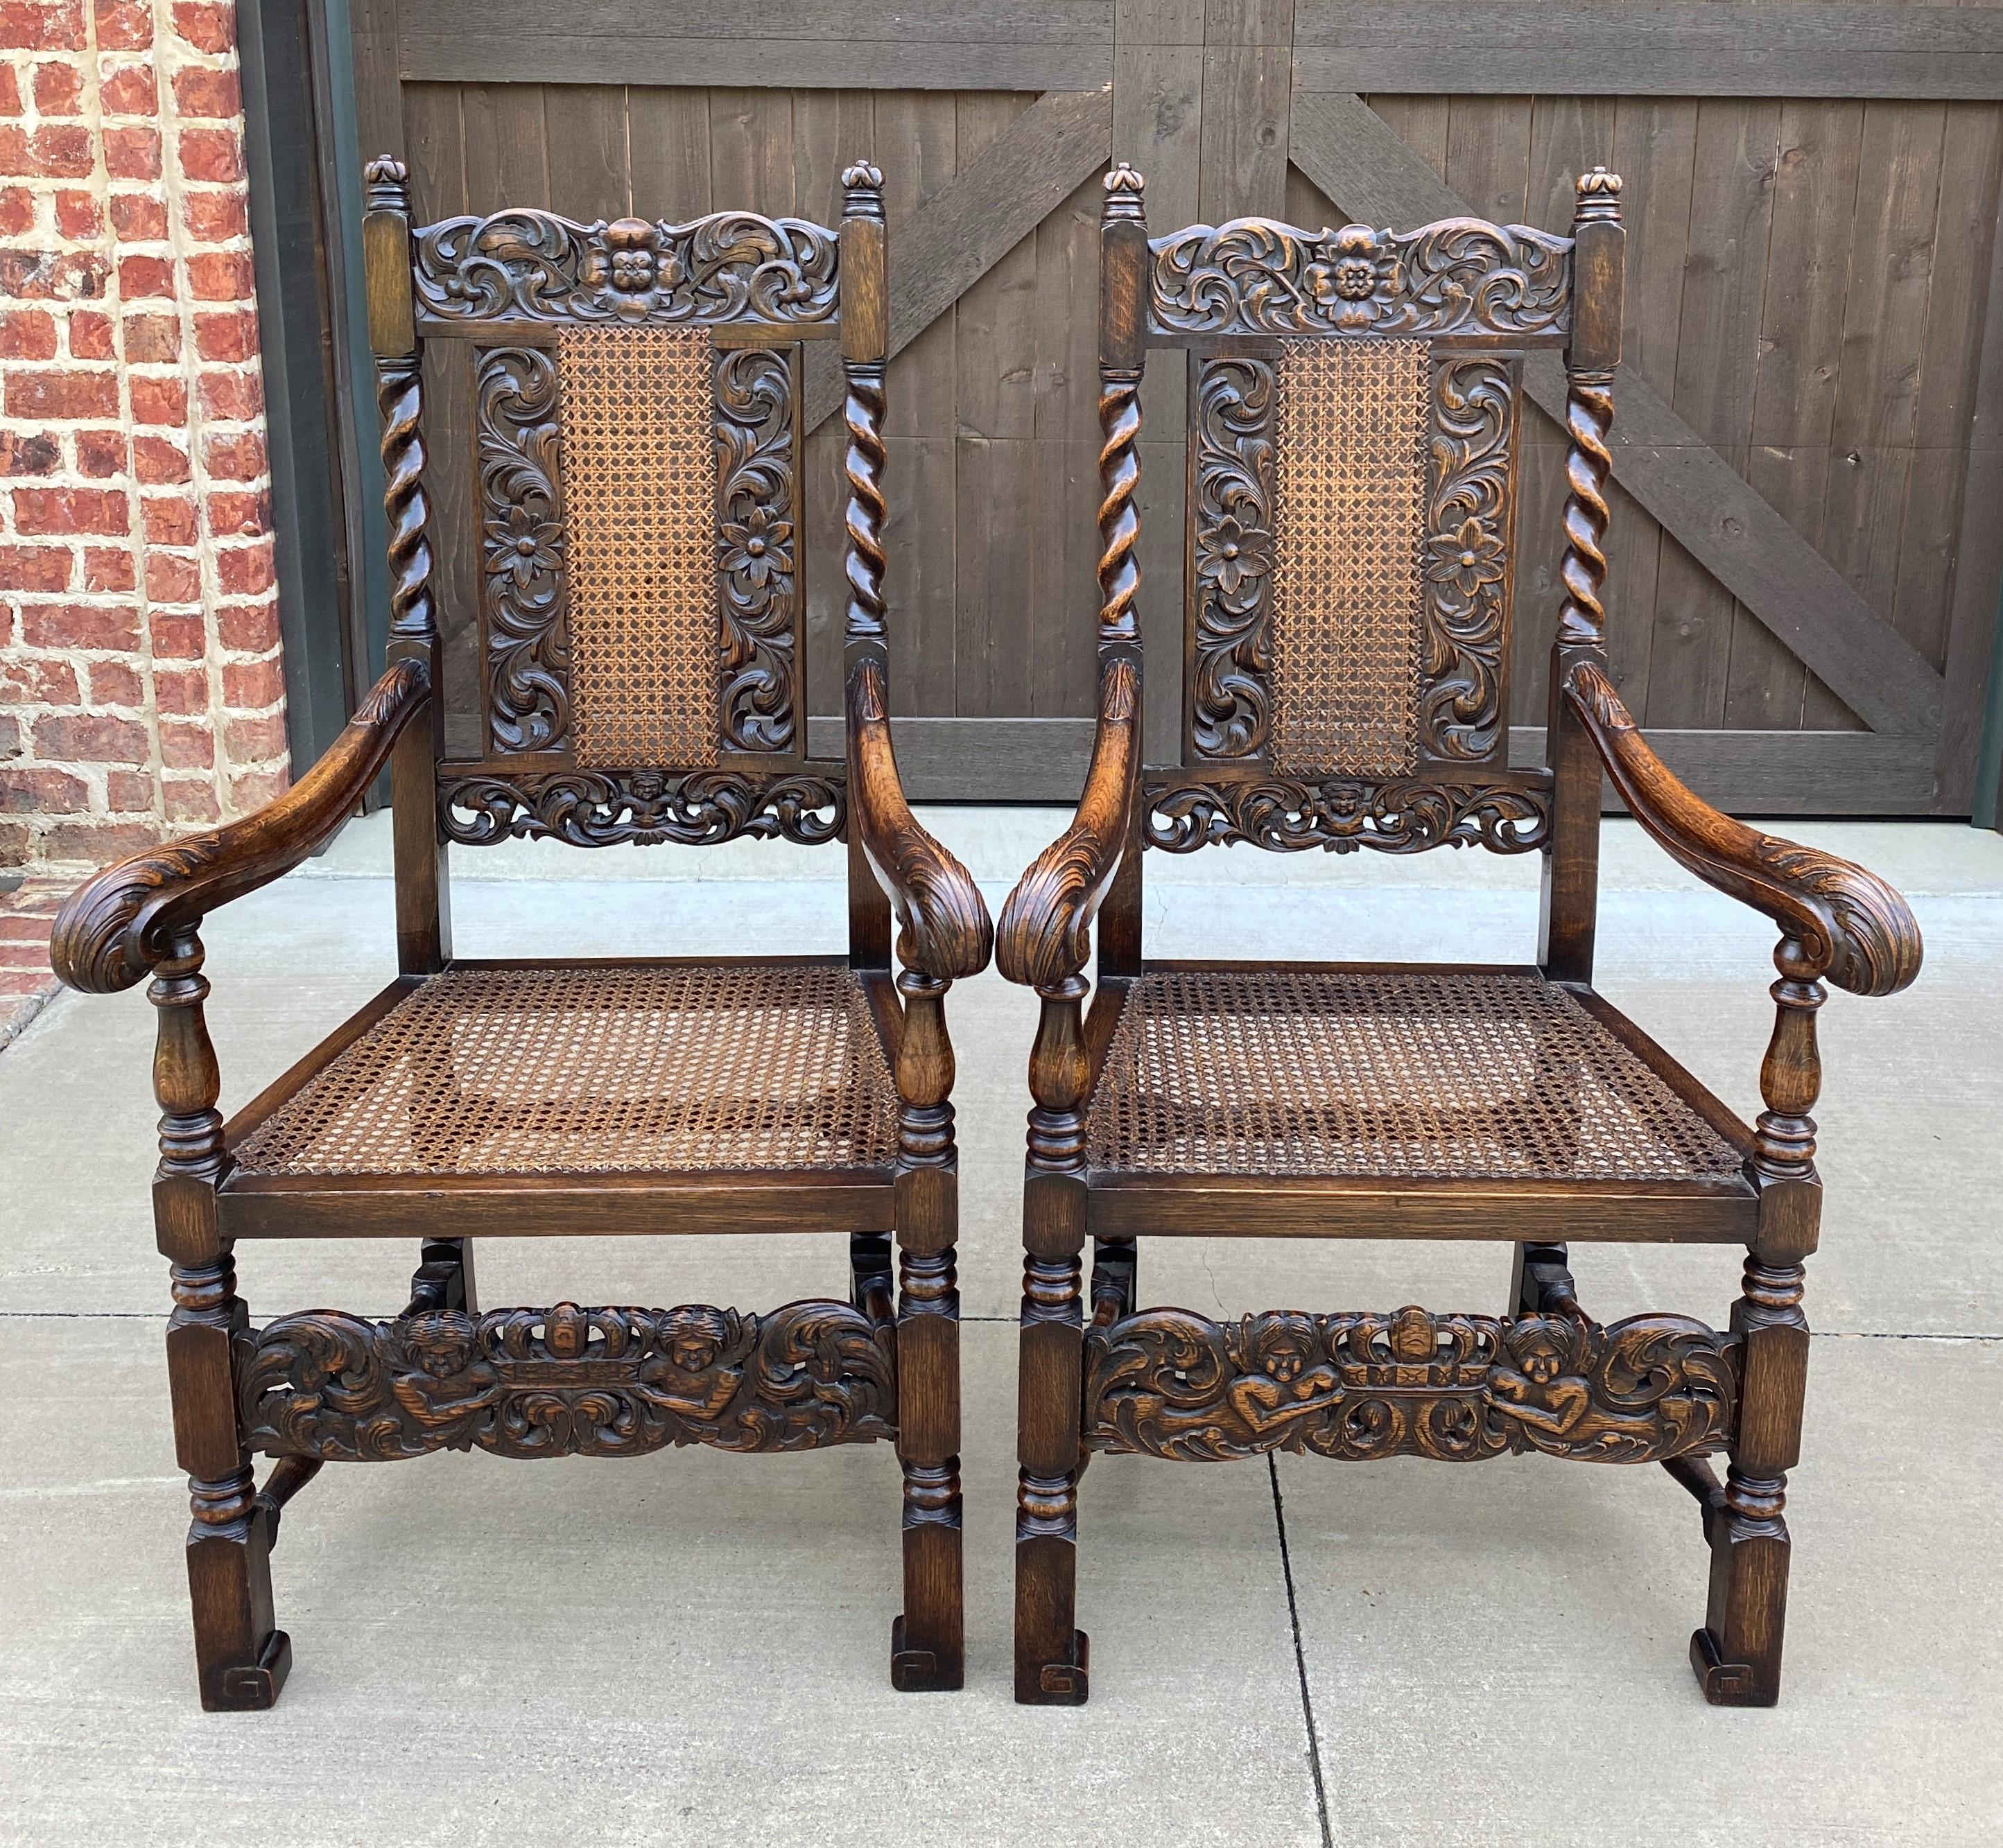 Antique English Chairs Set of 8 Barley Twist Caned Oak Dining Chairs Seating 4